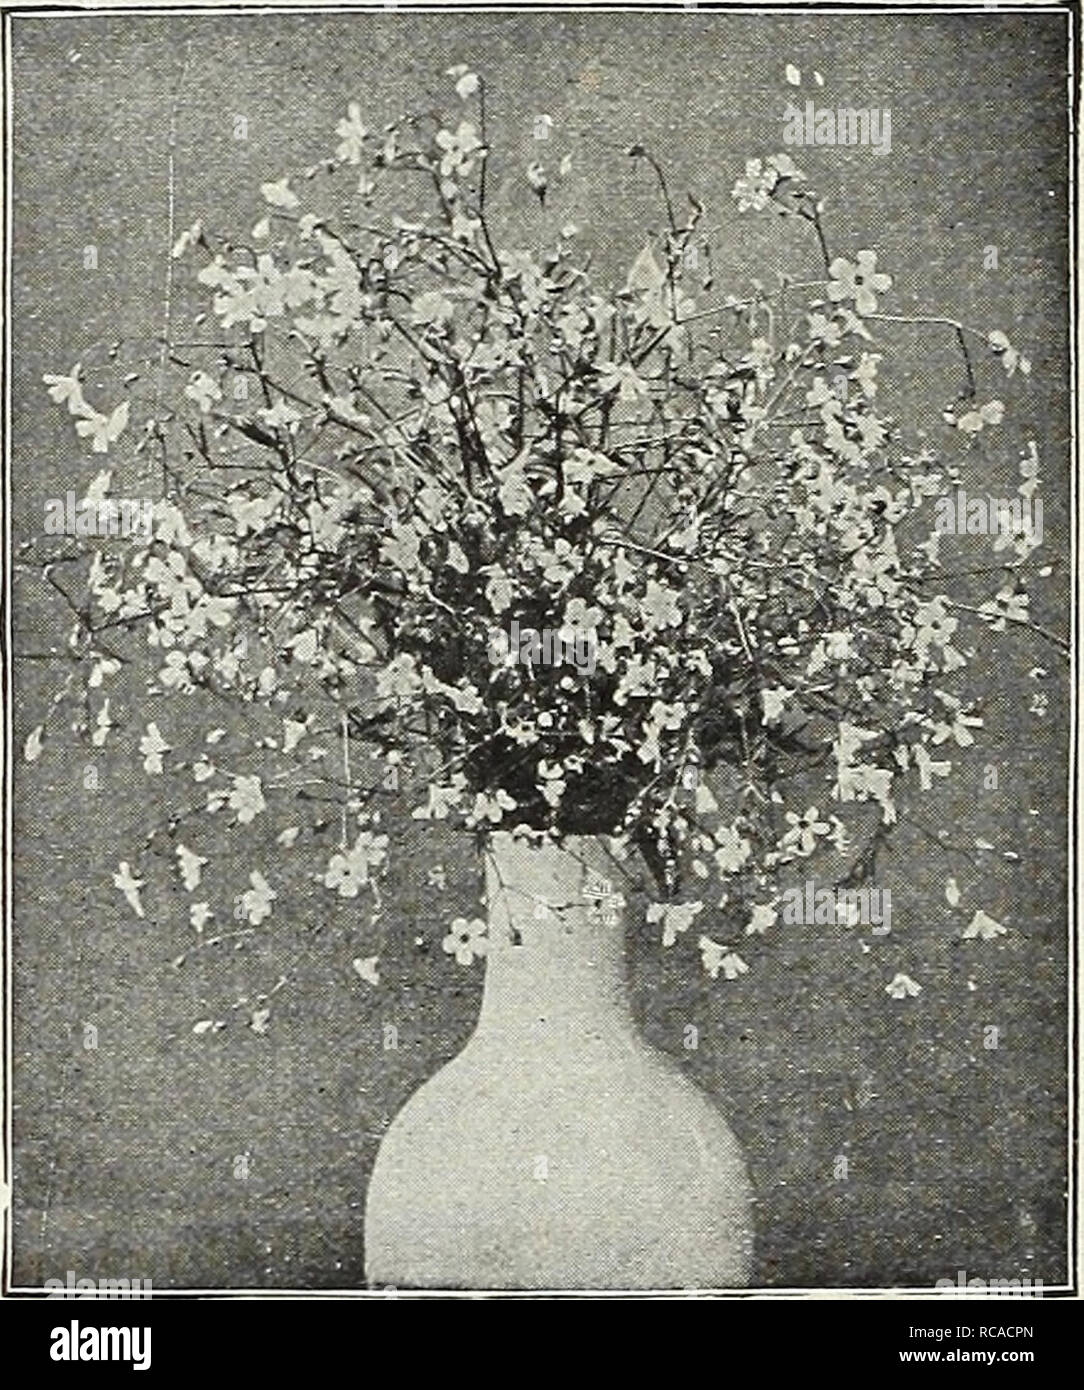 . Dreer's garden book 1916. Seeds Catalogs; Nursery stock Catalogs; Gardening Equipment and supplies Catalogs; Flowers Seeds Catalogs; Vegetables Seeds Catalogs; Fruit Seeds Catalogs. variety, and one of the most valuable for beds or specimens. Easily grown from seed, mak- ing nice plants the first year.. 10 2658 Stipa Pennata (Feather Grass). Perennial, beautiful, delicate white,feathery bloom; flowering the second season; 2 feet 10 2661 Uniola Latifolia (Spike Grass). A pretty native perennial variety, with very ornamental graceful drooping panicles, 3 to 4 feet 10 2669 Collection of Grasses Stock Photo